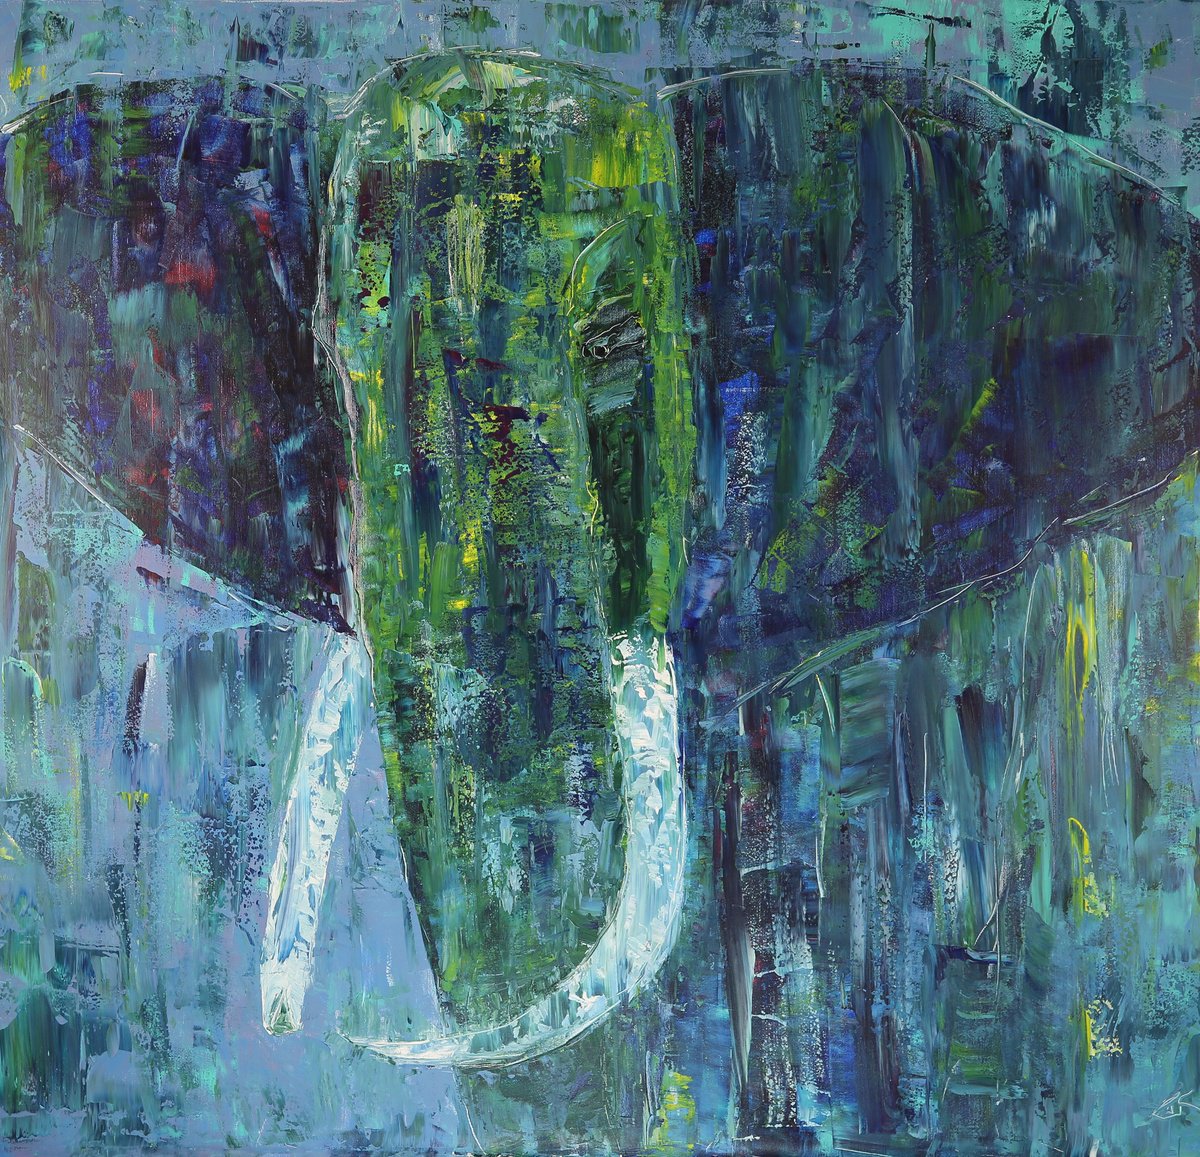 Elephant emerging from the forest, reflecting on the frailty of life by Denis Kuvayev